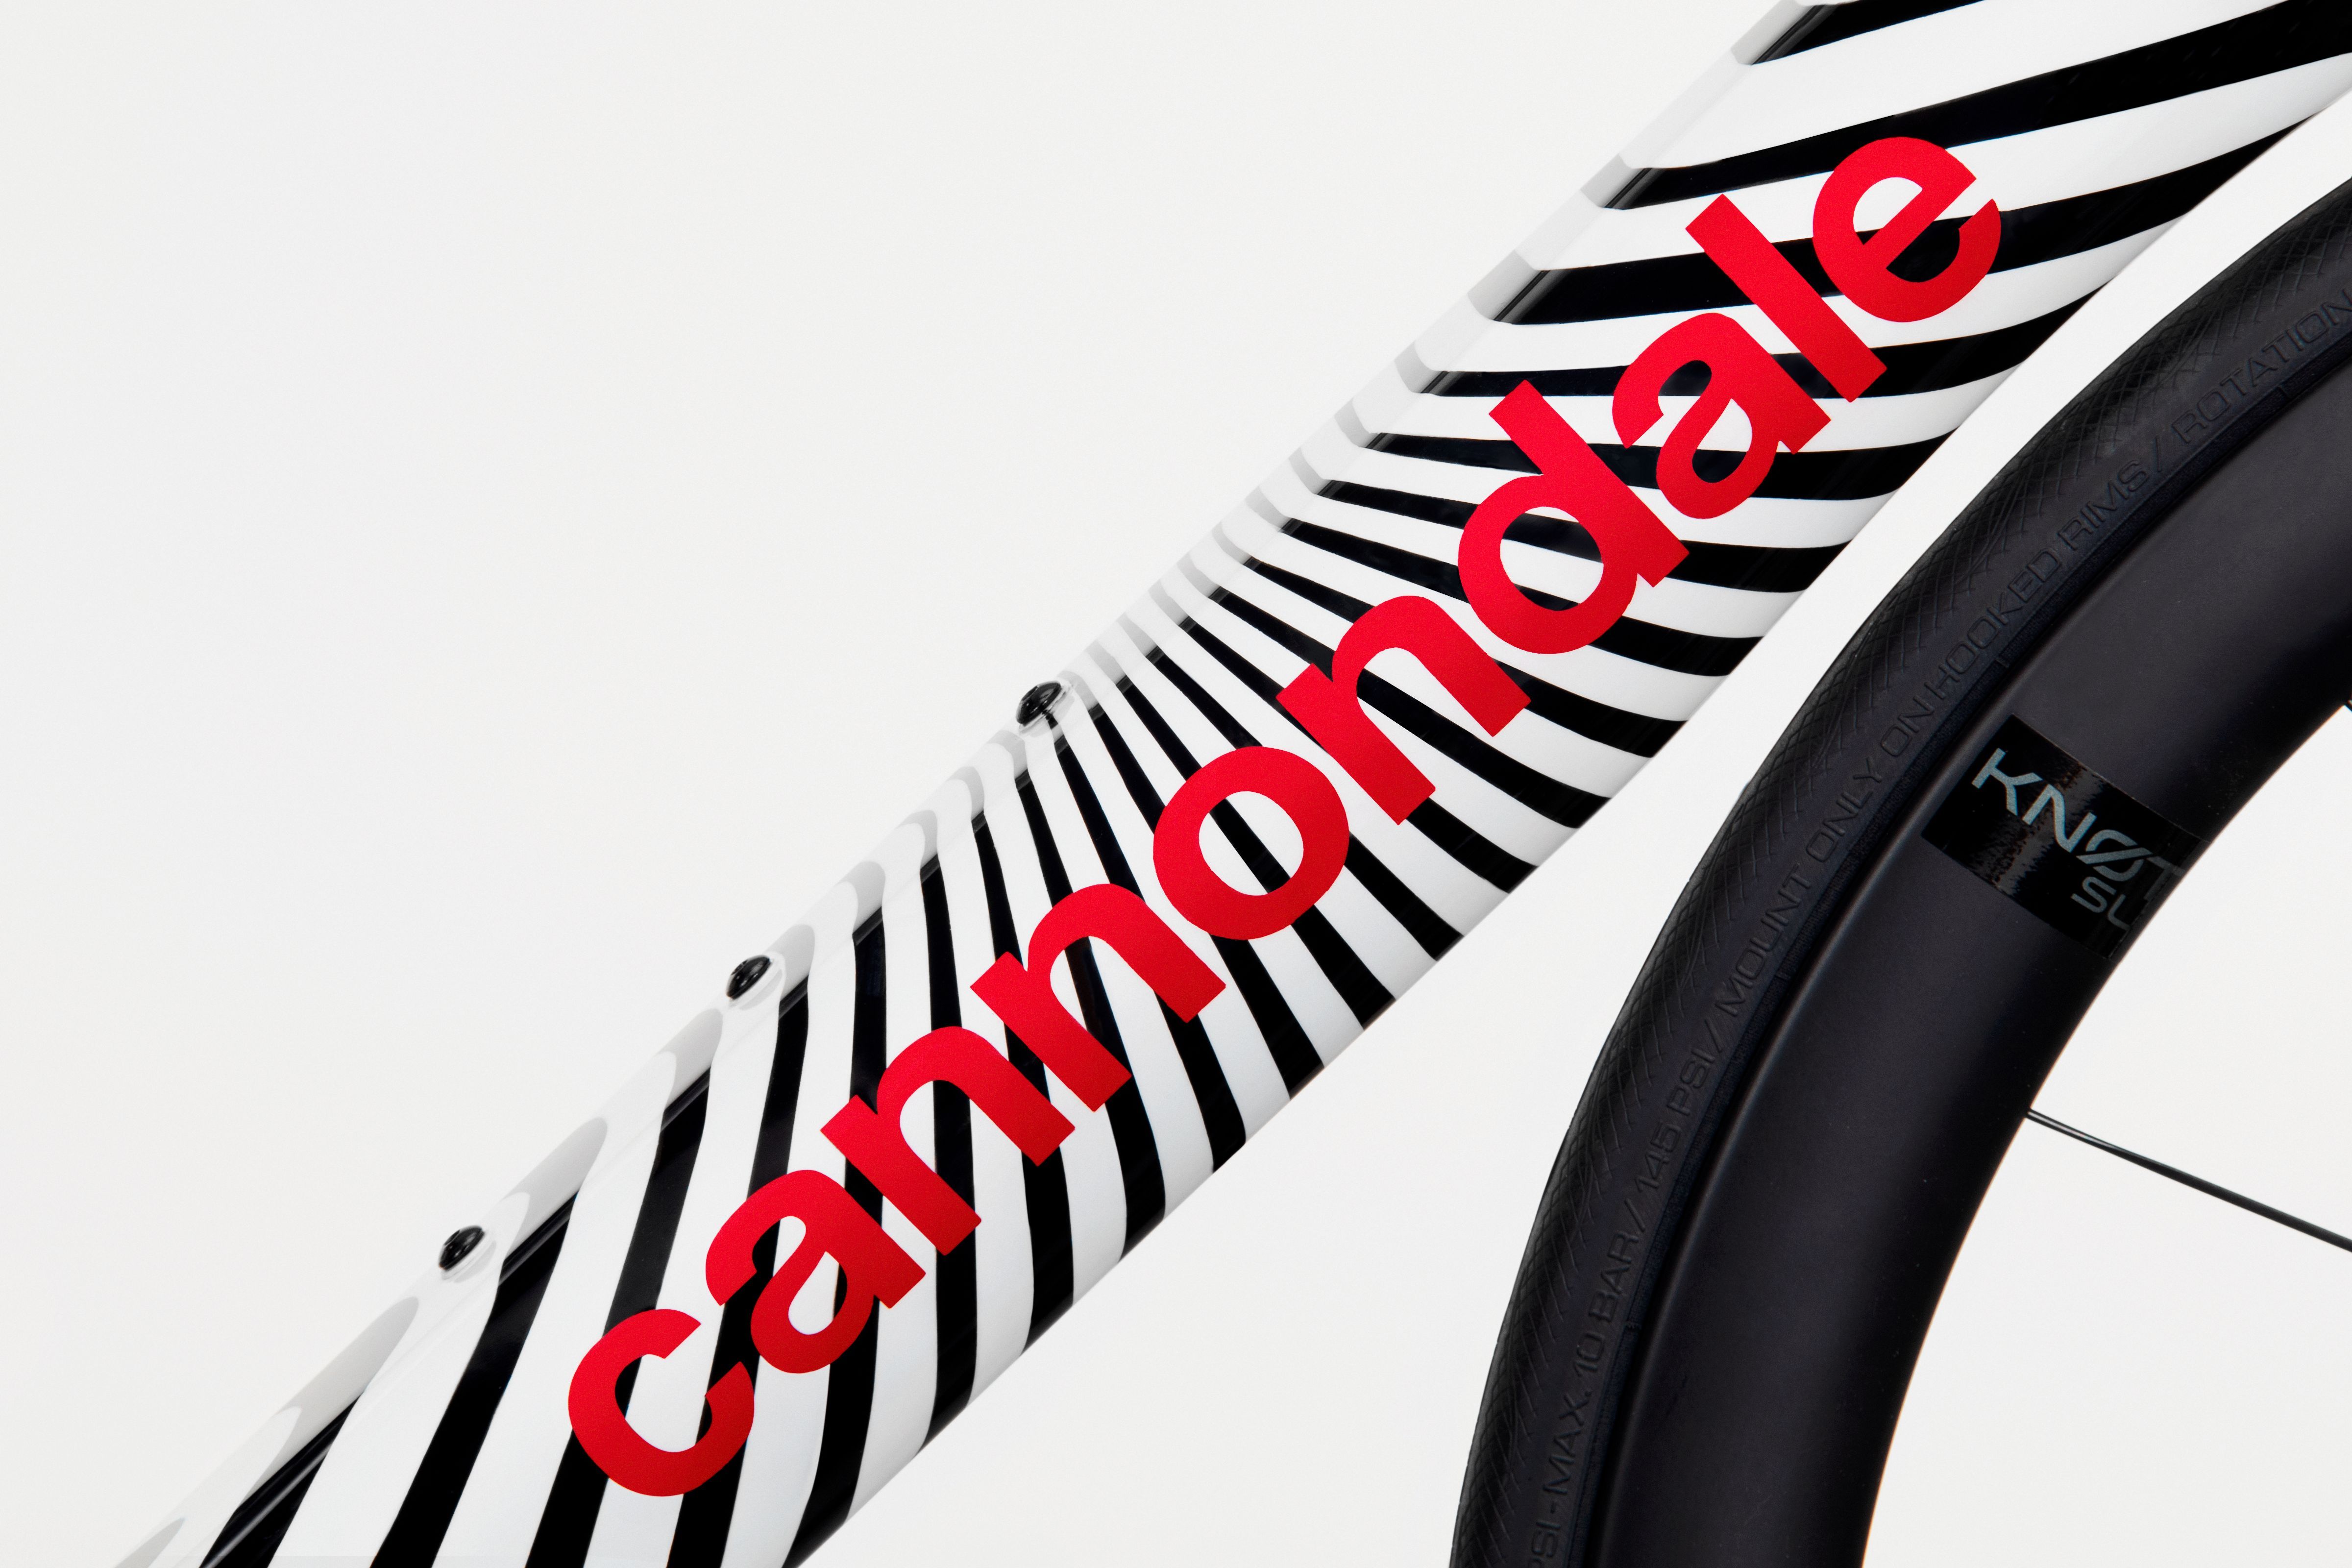 Cannondale and Stella McCartney Launch Three Custom Bicycles